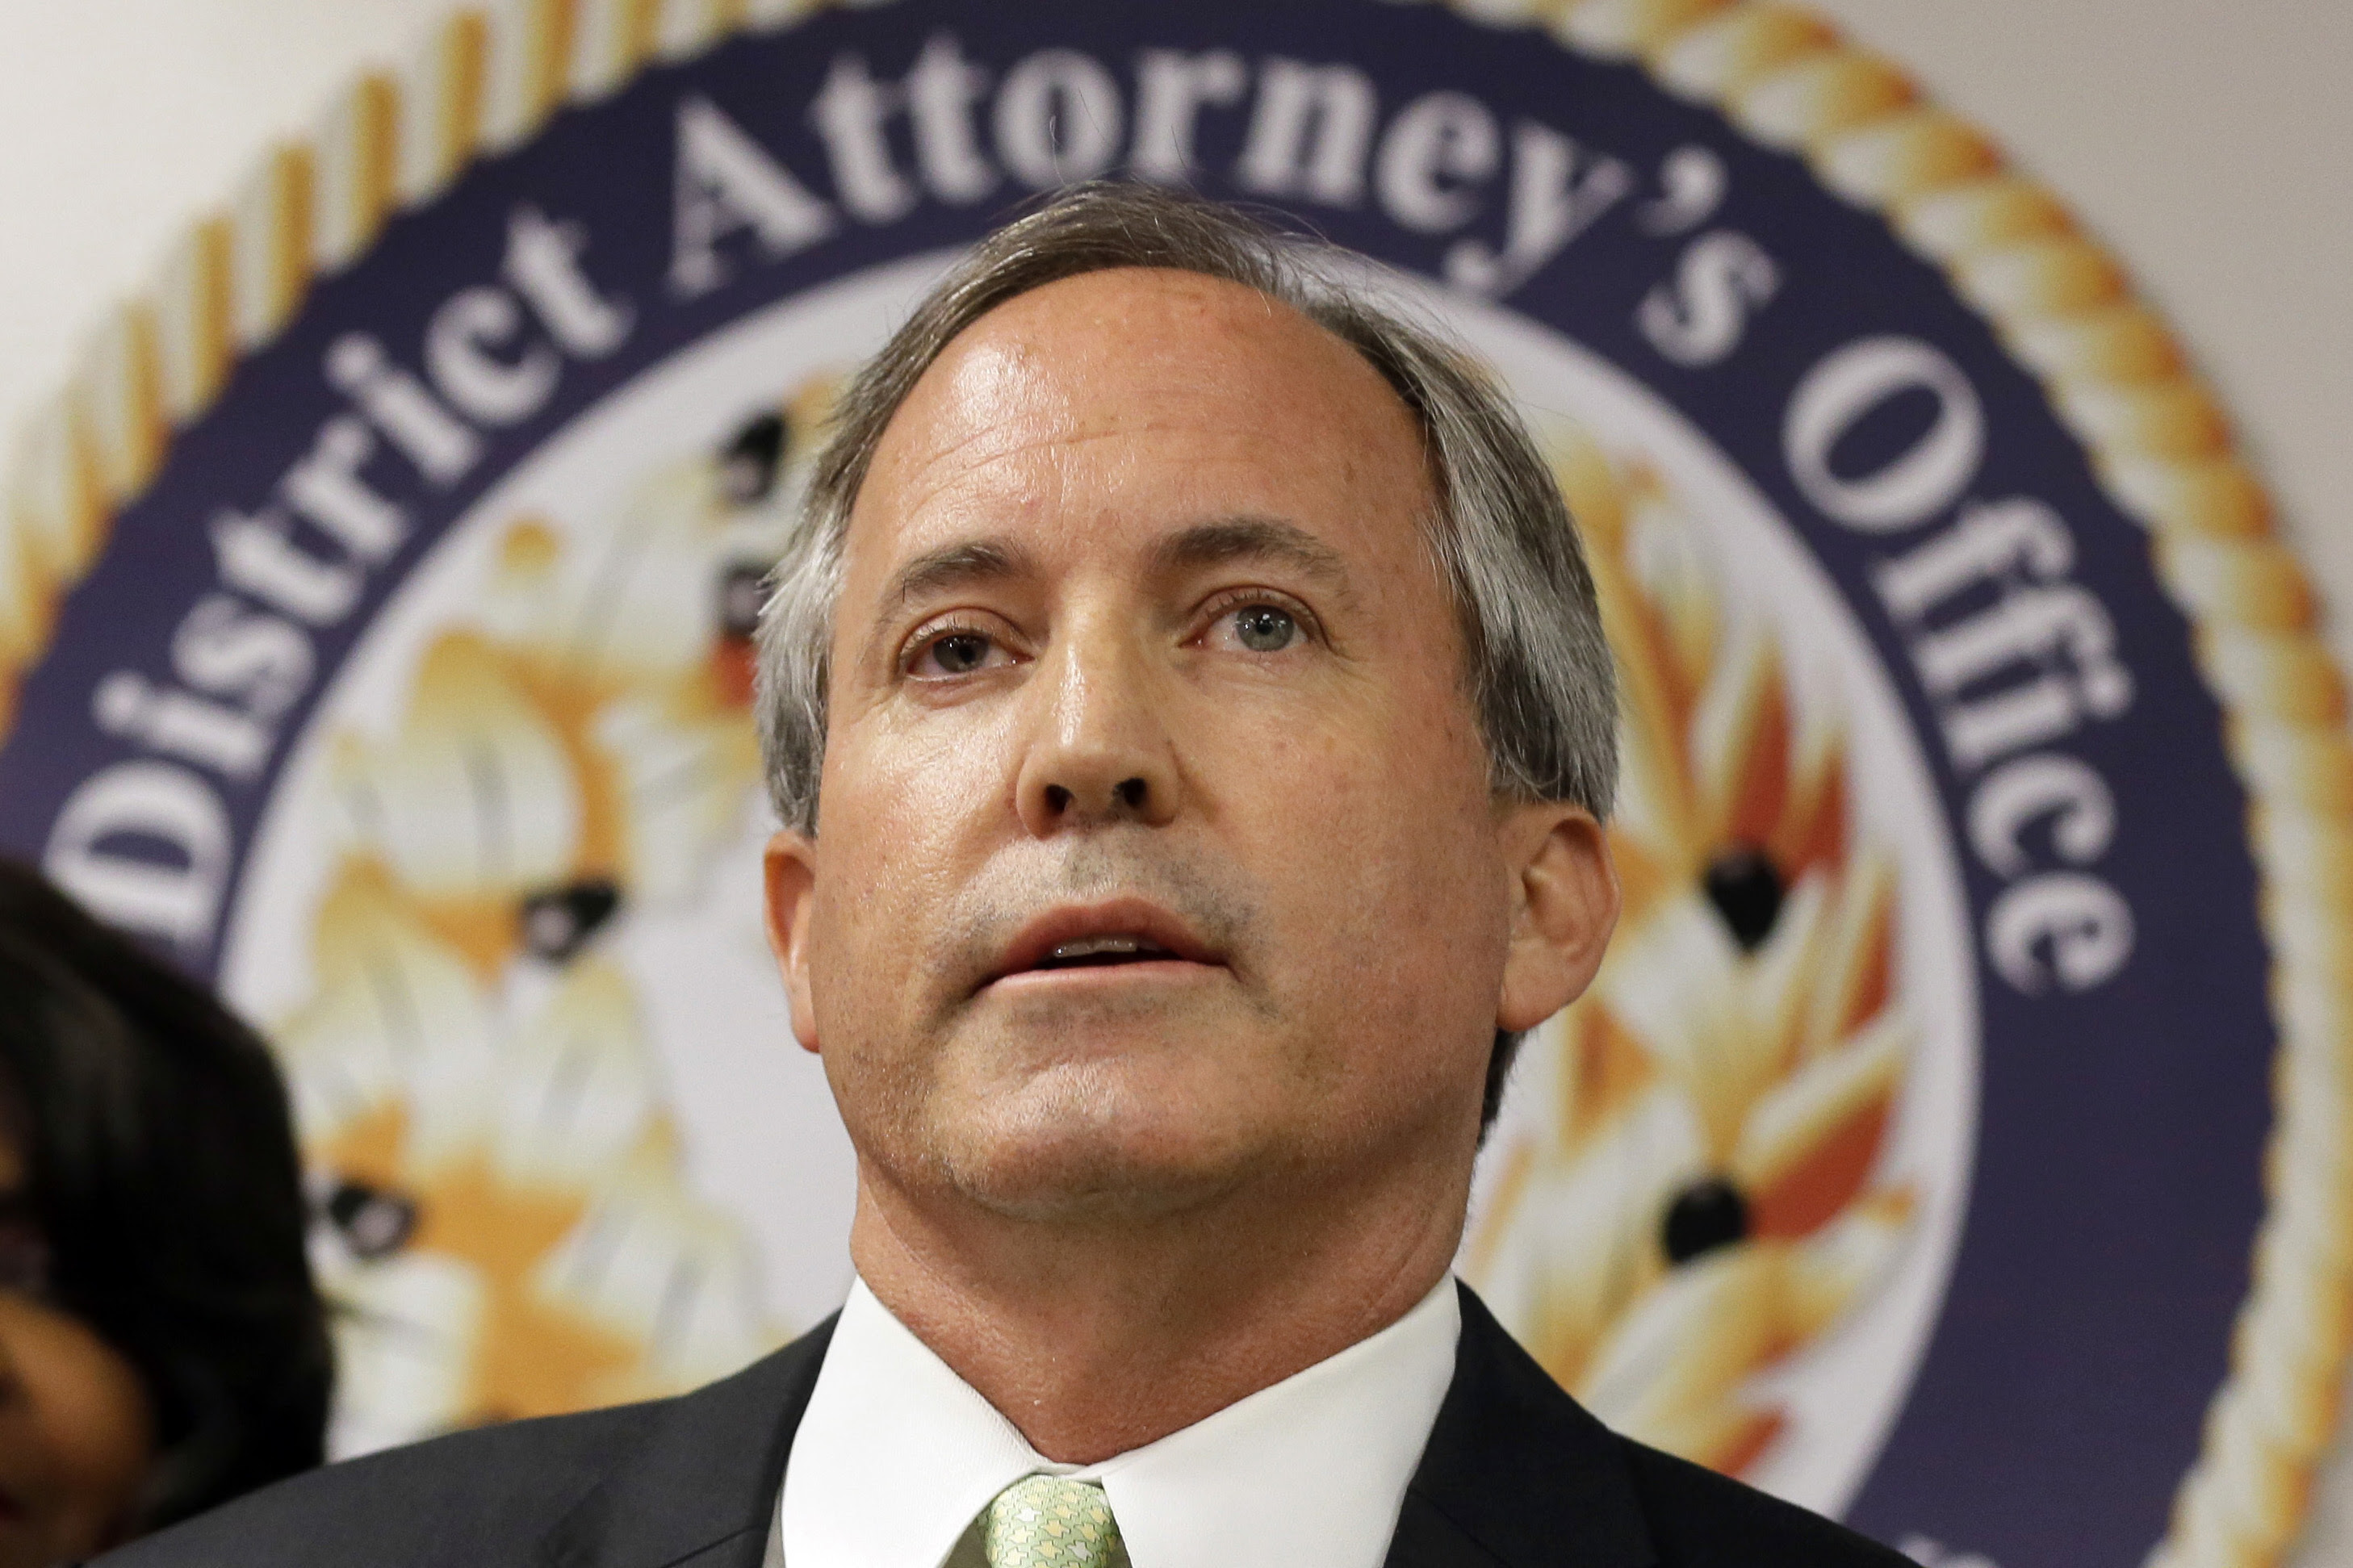 Texas Attorney General Ken Paxton speaks at a news conference in Dallas on June 22, 2017.